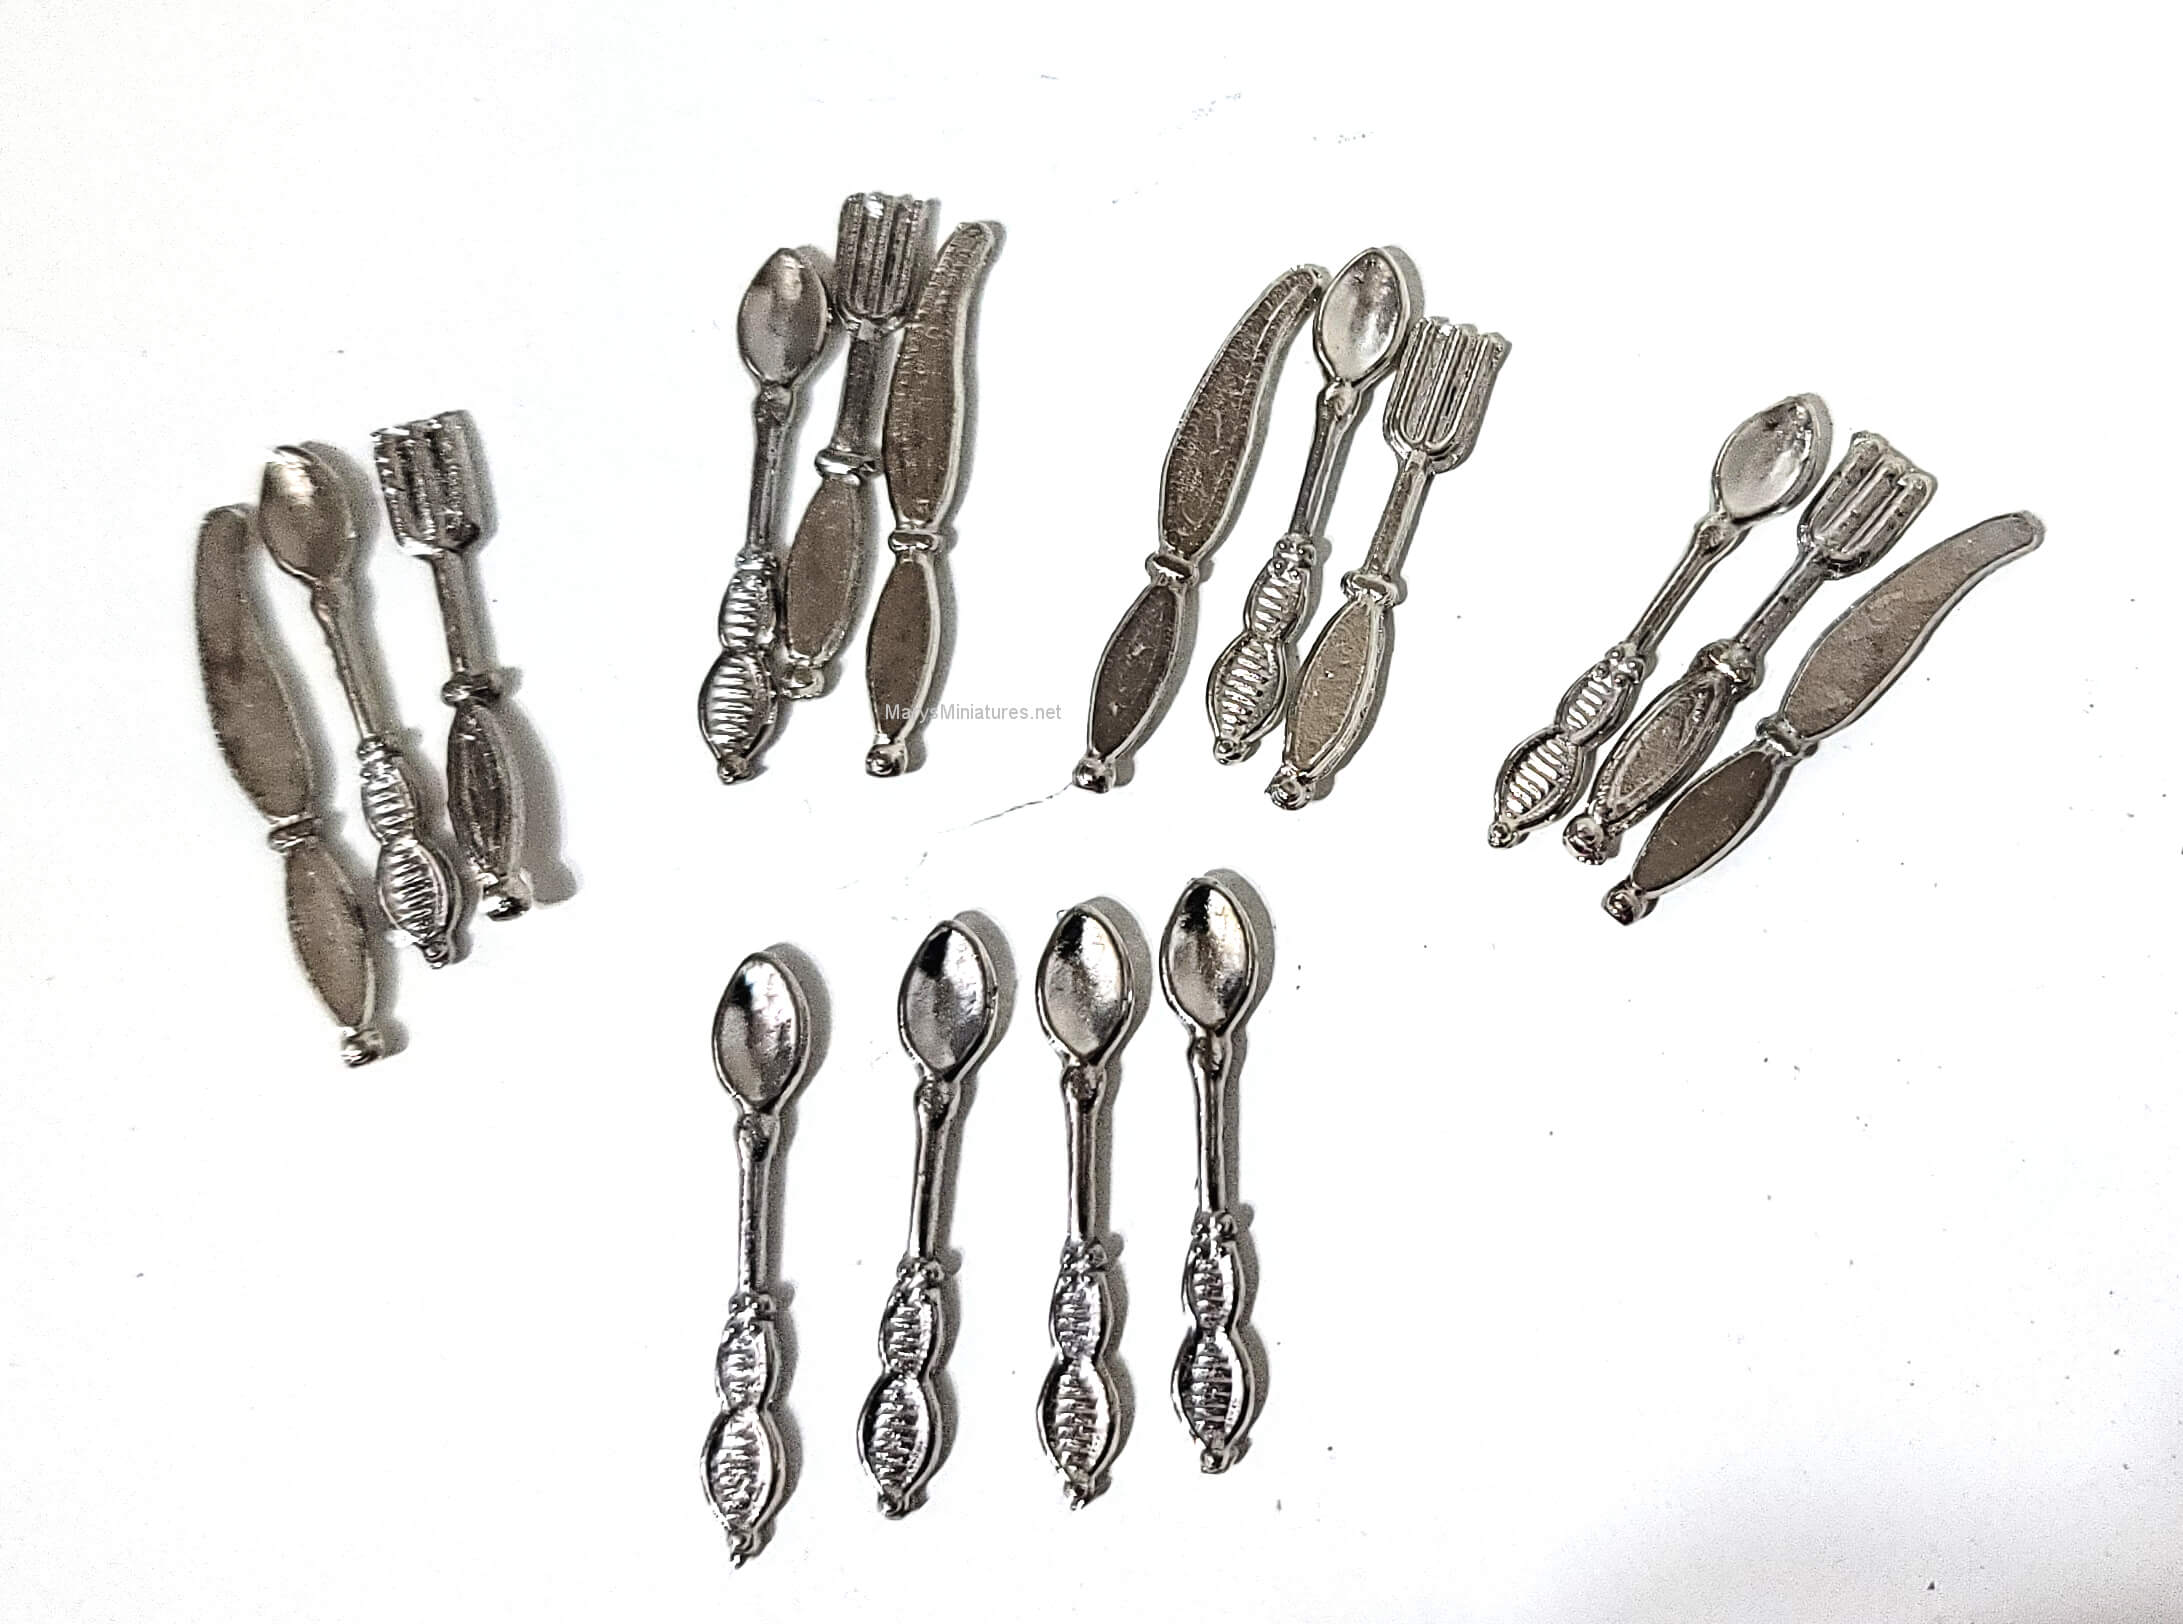 16pc Silverware Service for 4 - w/ 4 Spoons